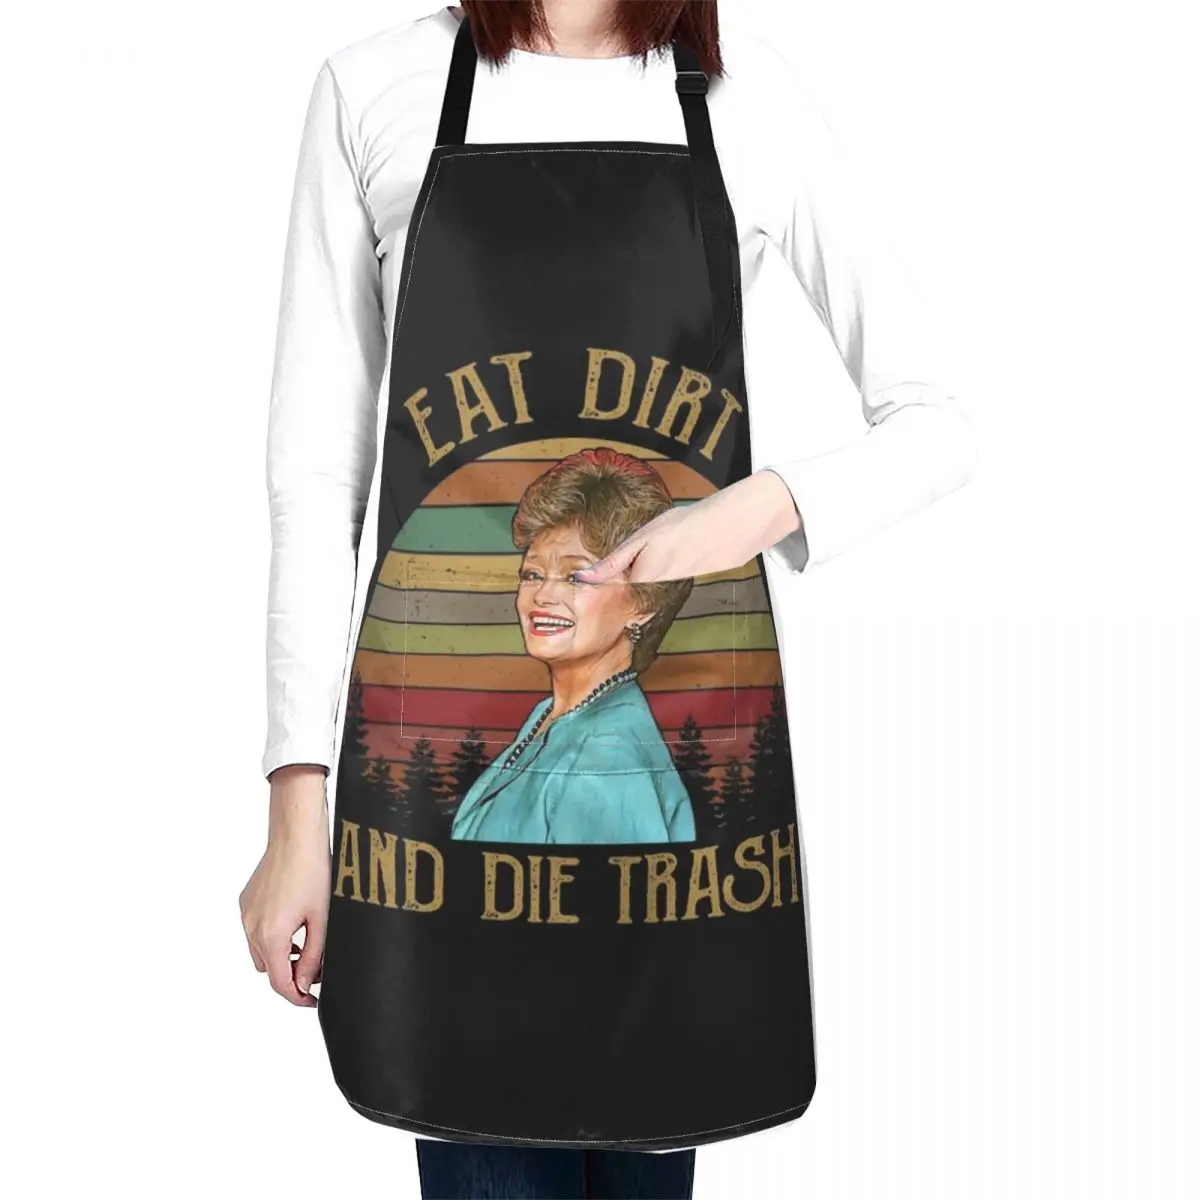 

Eat Dirt and Die Trash Blanche Golden Girls Vintage Retro Apron Kitchen Aprons Men Things For The Home